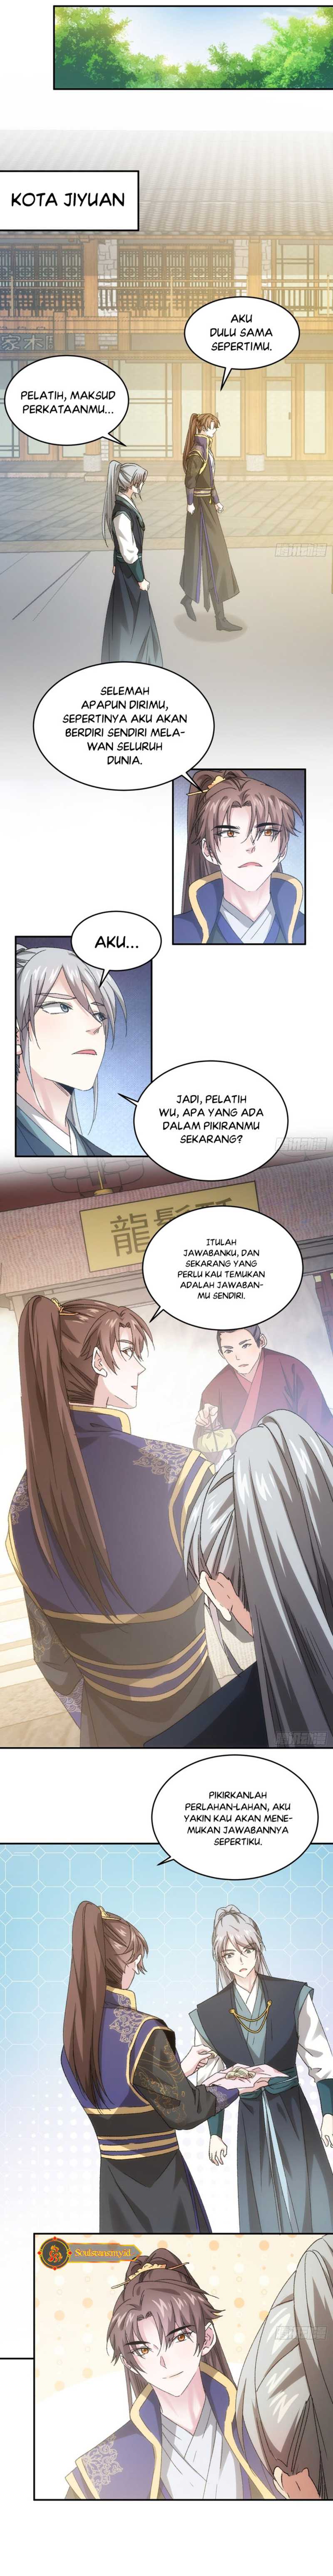 Dilarang COPAS - situs resmi www.mangacanblog.com - Komik i just dont play the card according to the routine 135 - chapter 135 136 Indonesia i just dont play the card according to the routine 135 - chapter 135 Terbaru 5|Baca Manga Komik Indonesia|Mangacan